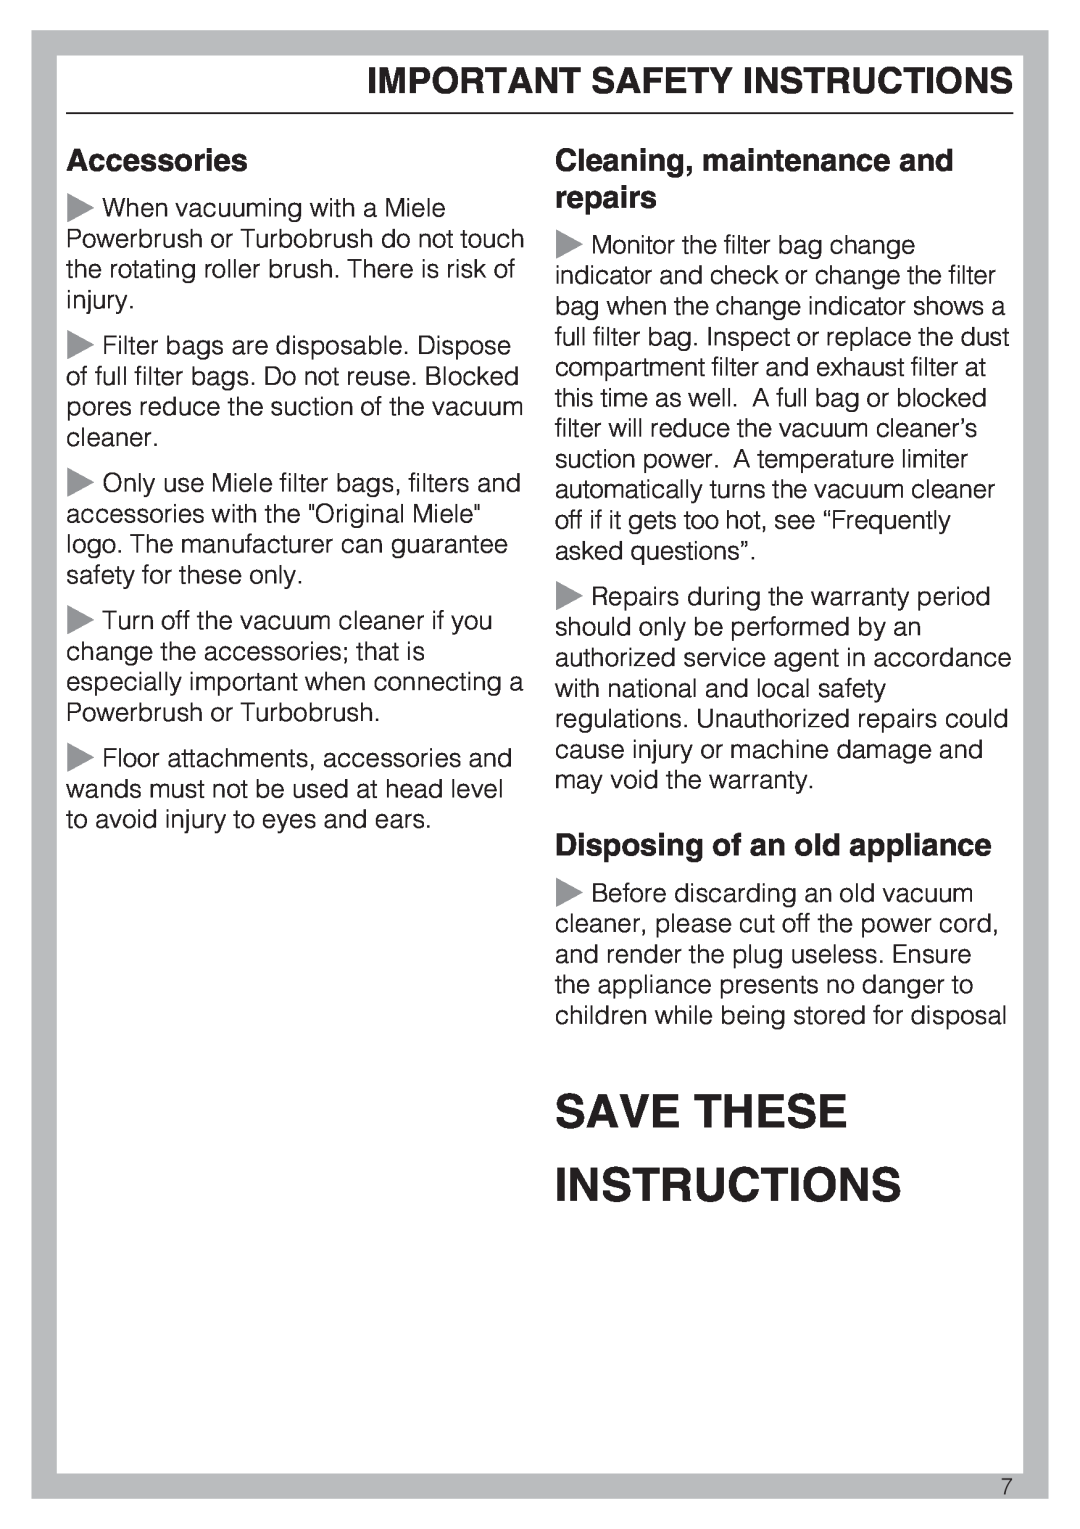 Miele S 190 manual Save These Instructions, Accessories, Cleaning, maintenance and repairs, Disposing of an old appliance 